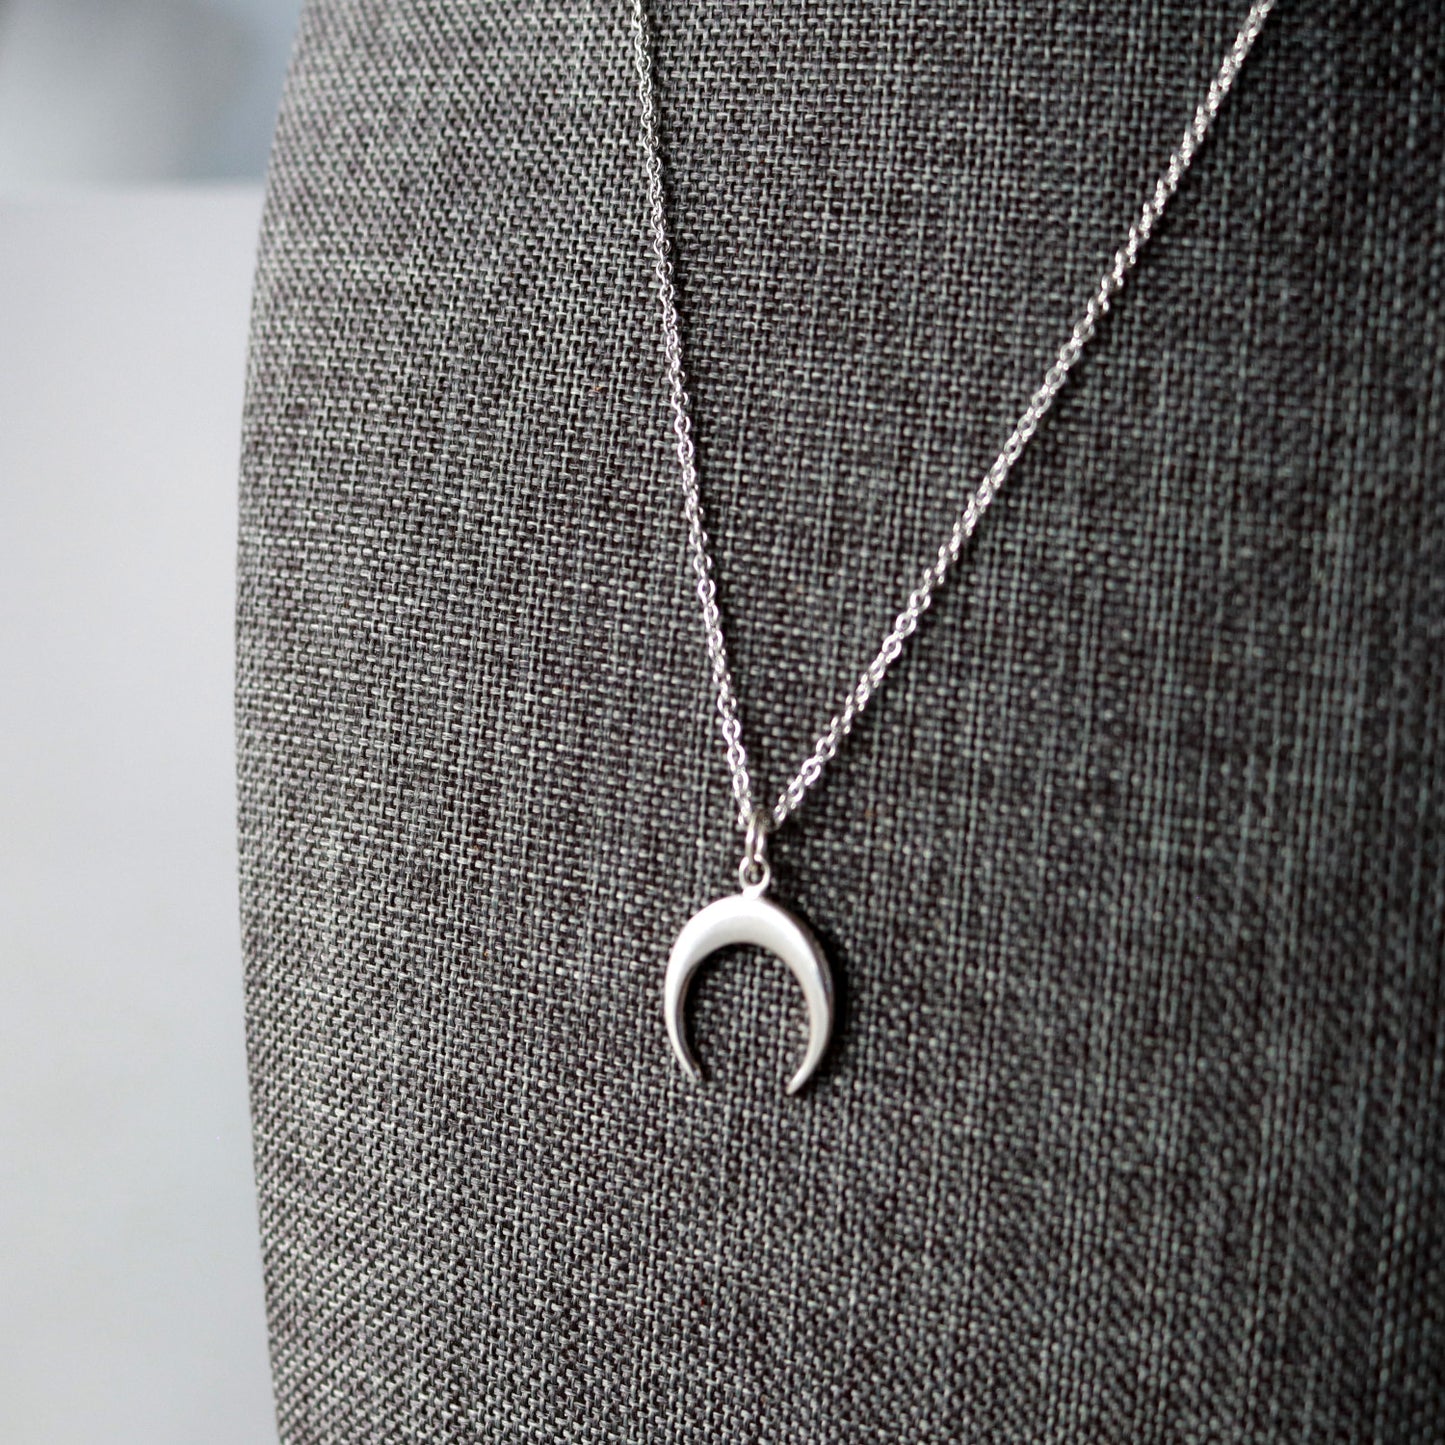 Sterling Silver Crescent Moon Necklace-Womens-LittleGreenRoomJewelry-LittleGreenRoomJewelry